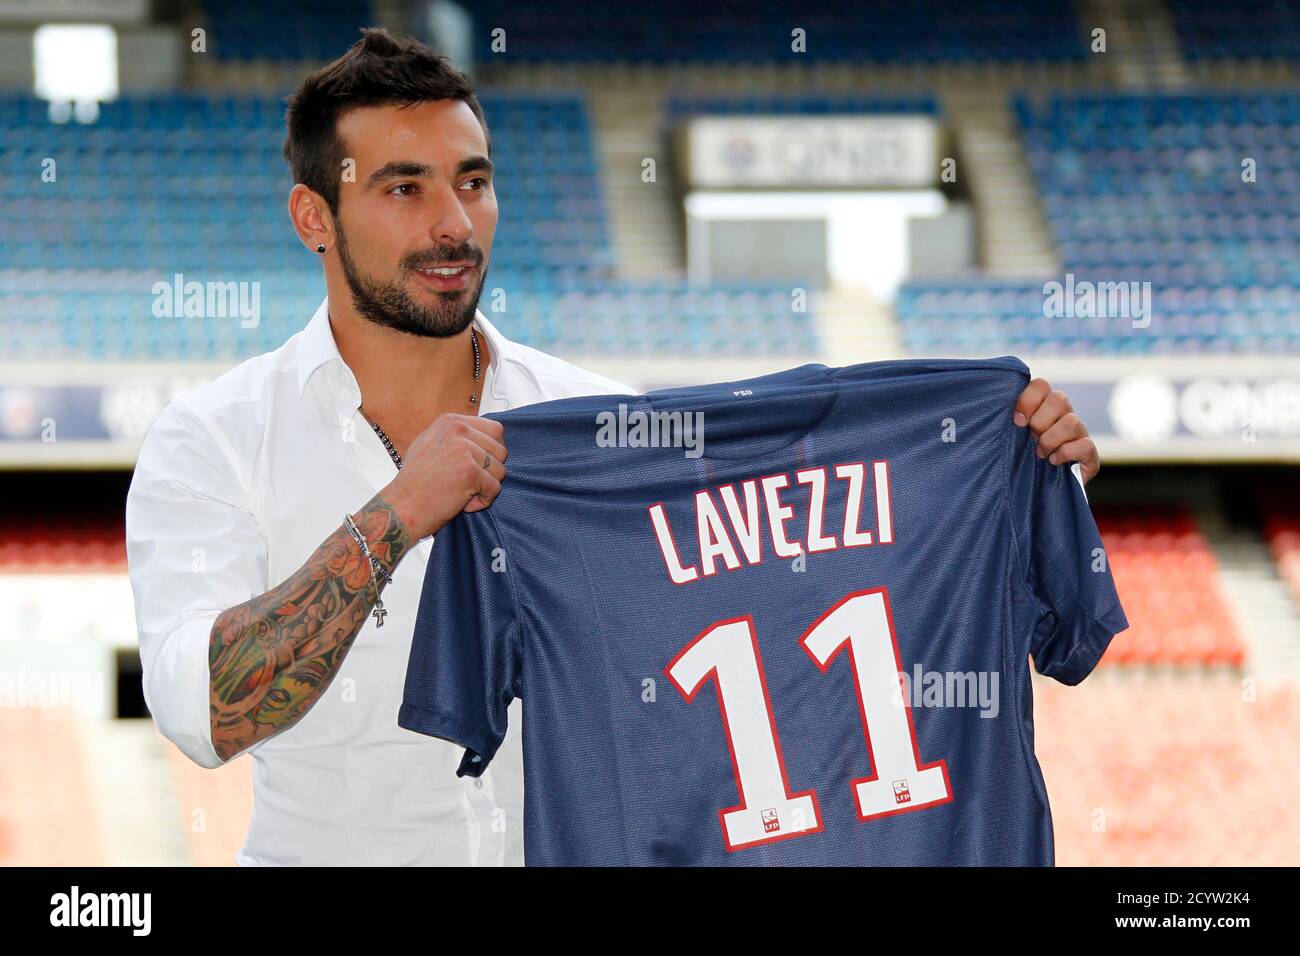 Ezequiel Lavezzi, newly-signed player for French soccer club Paris St  Germain, holds his new jersey after a news conference at the Parc des  Princes stadium in Paris July 2, 2012. REUTERS/Mal Langsdon (